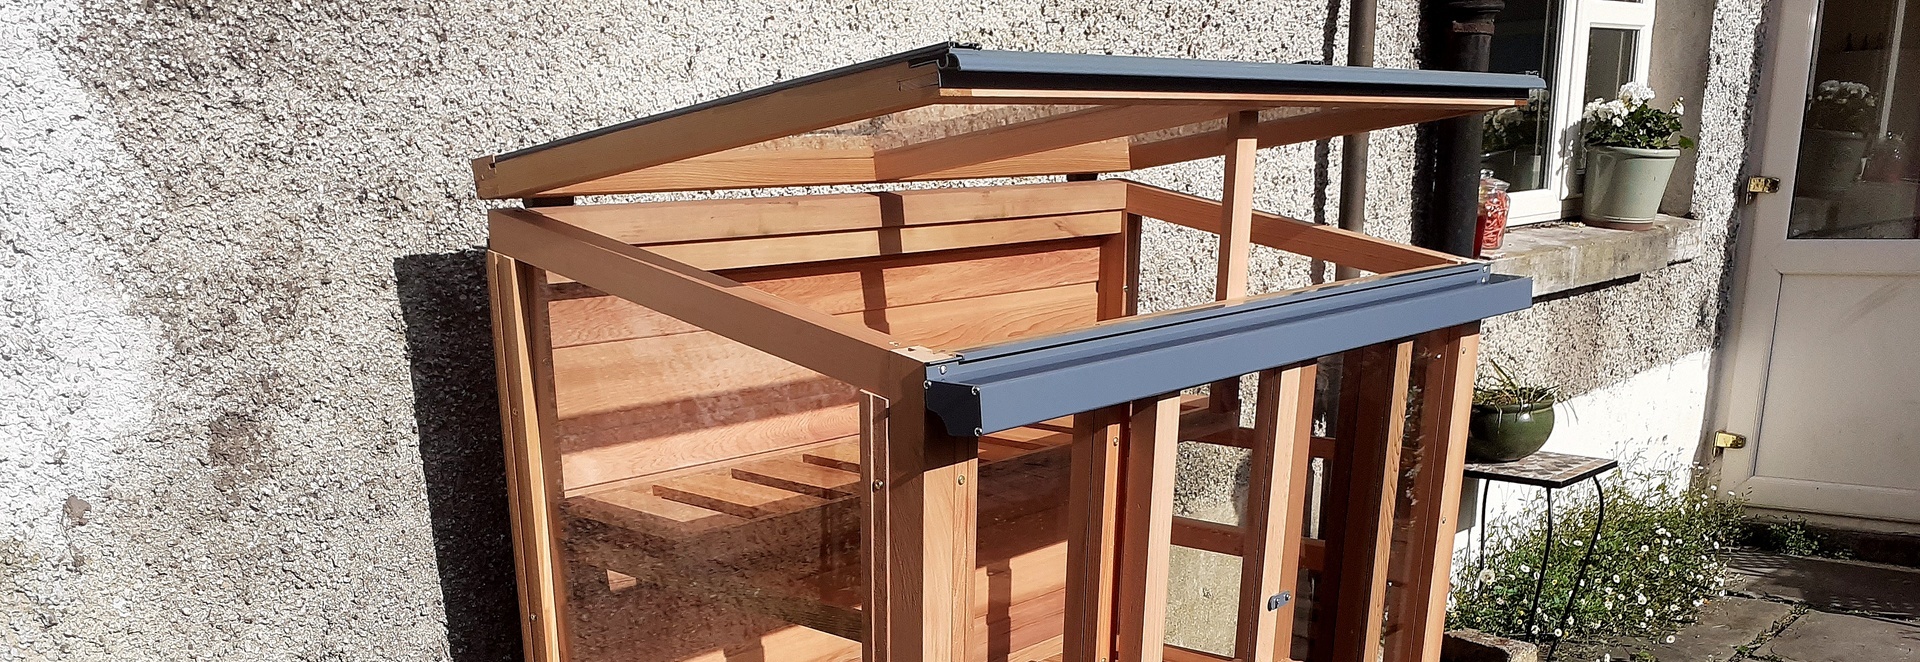 The Gabriel Ash Upright Coldframe made with Western Red Cedar with two toughened glass lids and sliding doors | Supplied + fitted in Blackrock,  Co Dublin by Owen Chubb 087-2306 128